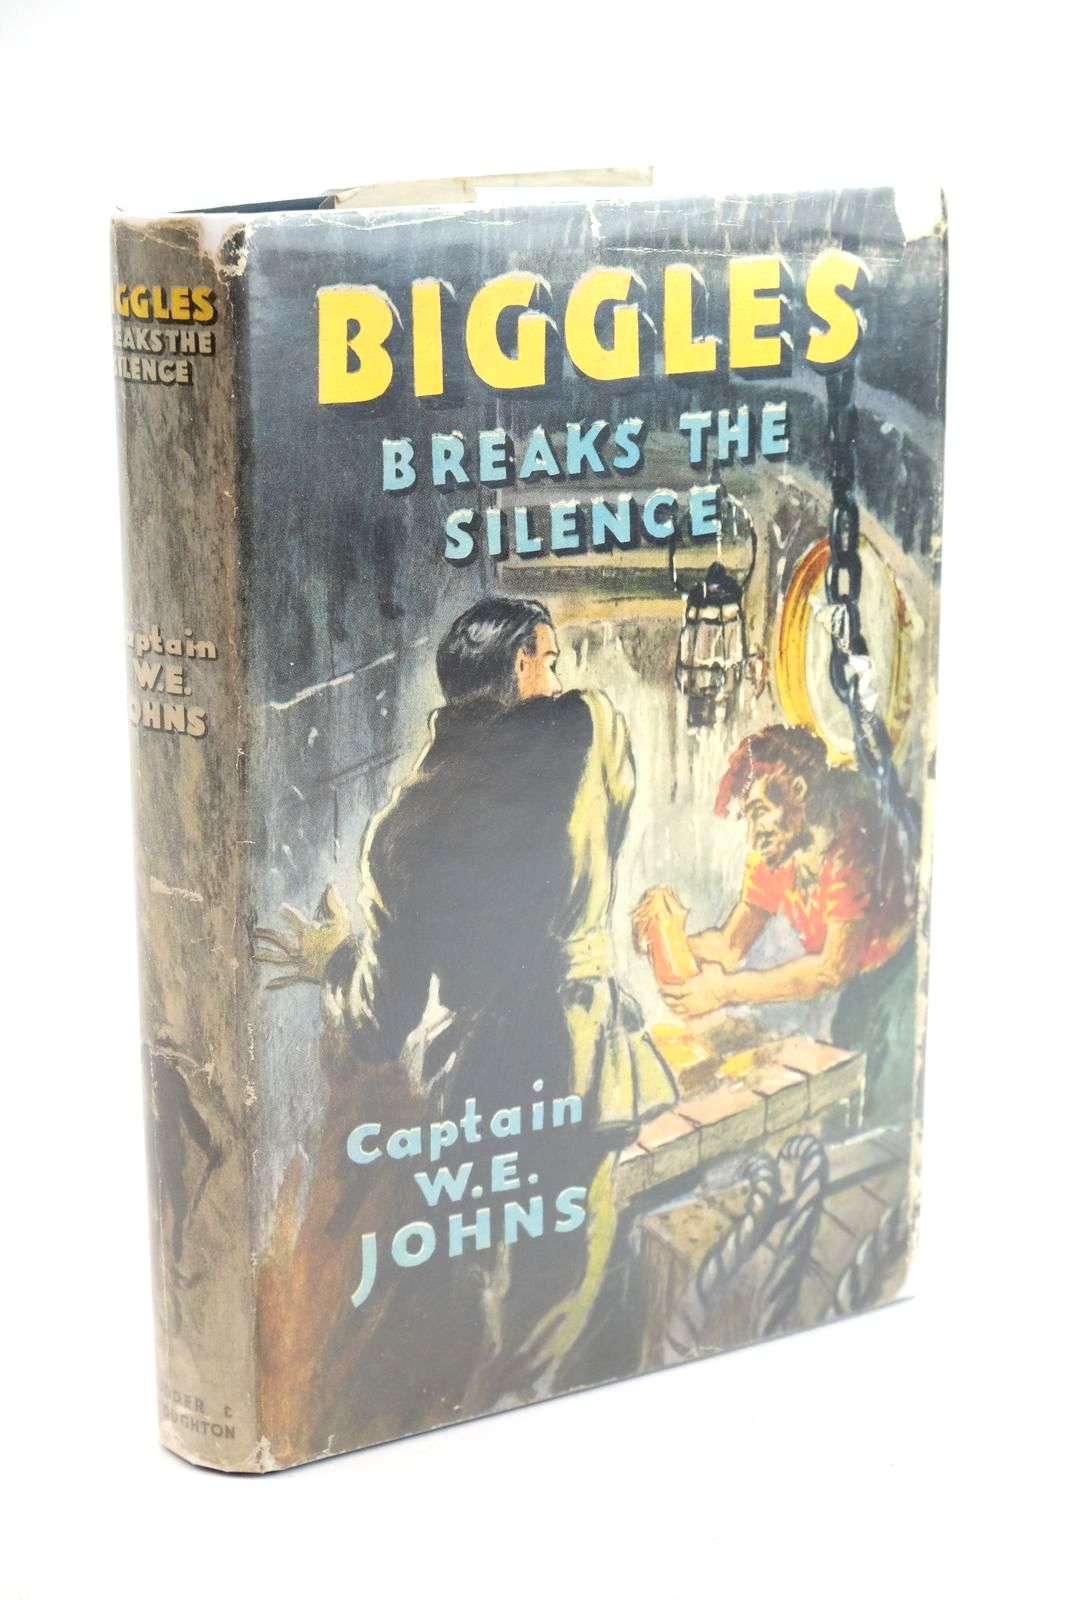 Photo of BIGGLES BREAKS THE SILENCE written by Johns, W.E. illustrated by Stead, Leslie published by Hodder & Stoughton (STOCK CODE: 1323593)  for sale by Stella & Rose's Books